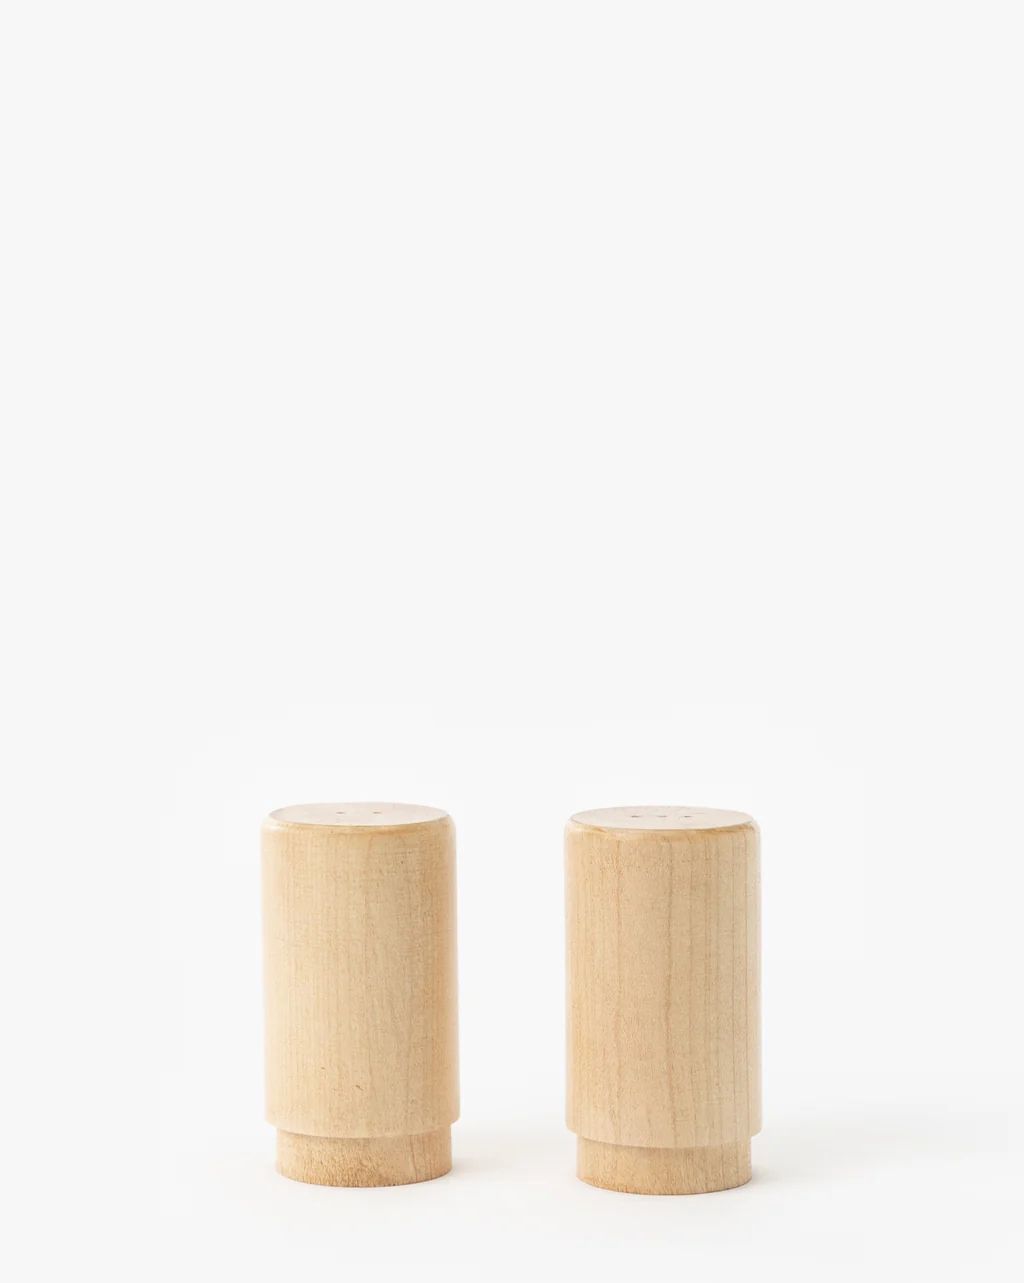 Cabot Salt & Pepper Shakers (Set of 2) | McGee & Co.